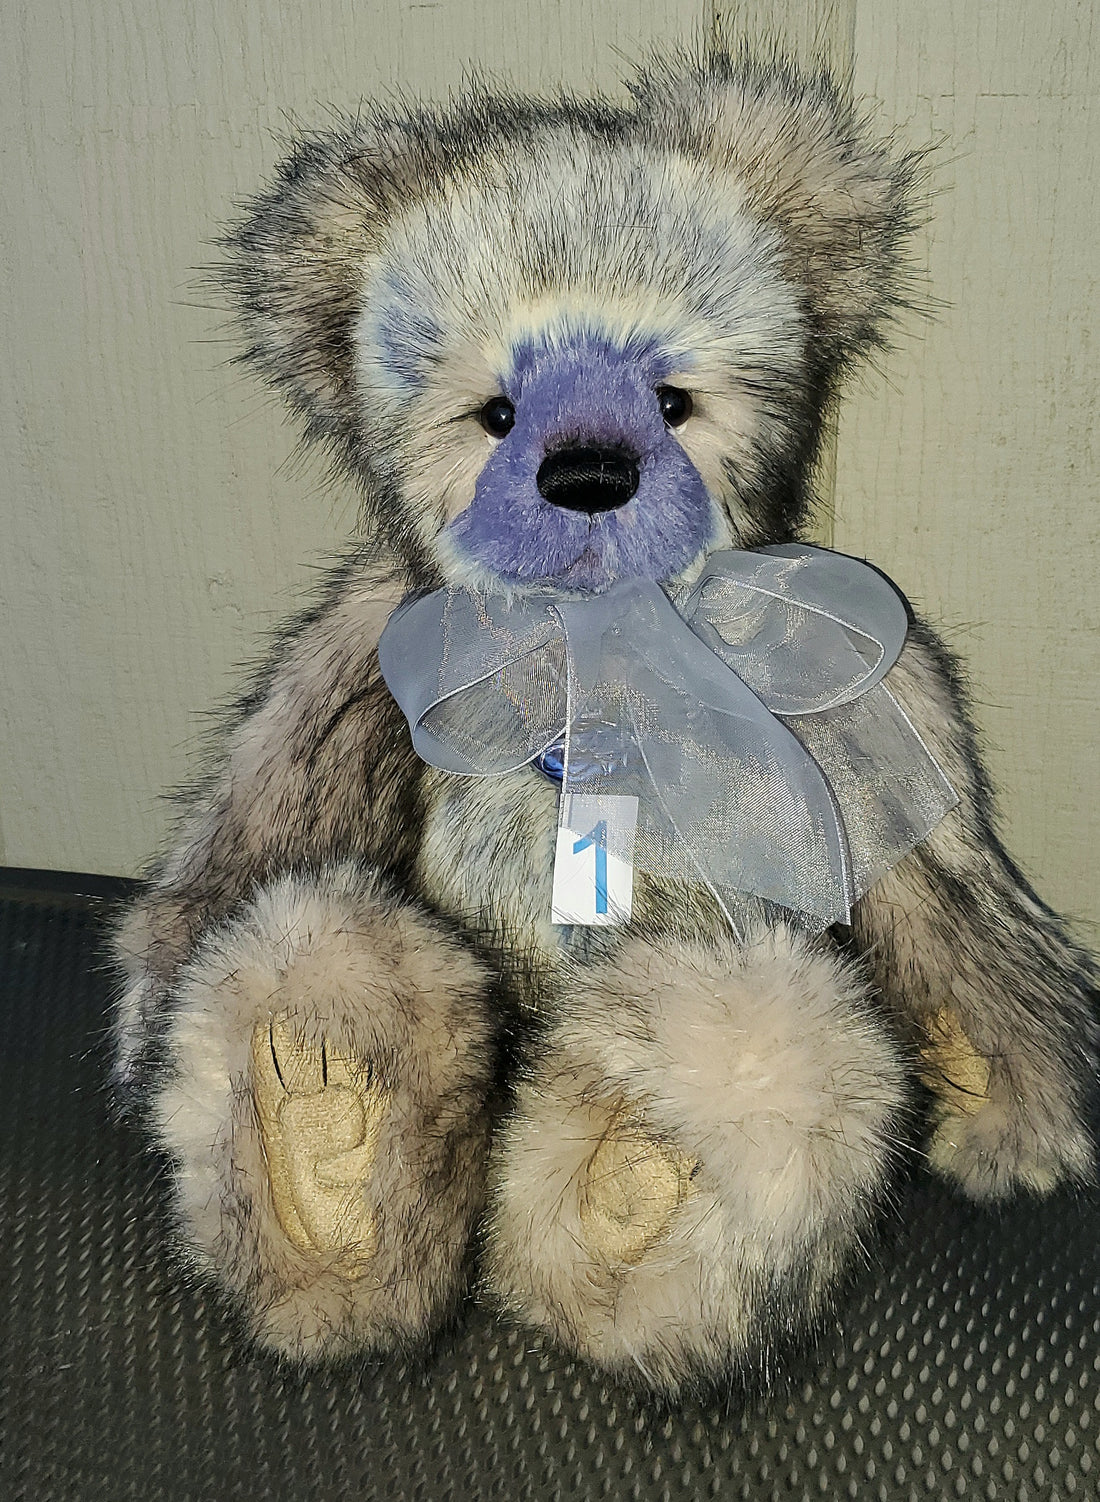 Blueberry Pudding - 15" Plush by Charlie Bears